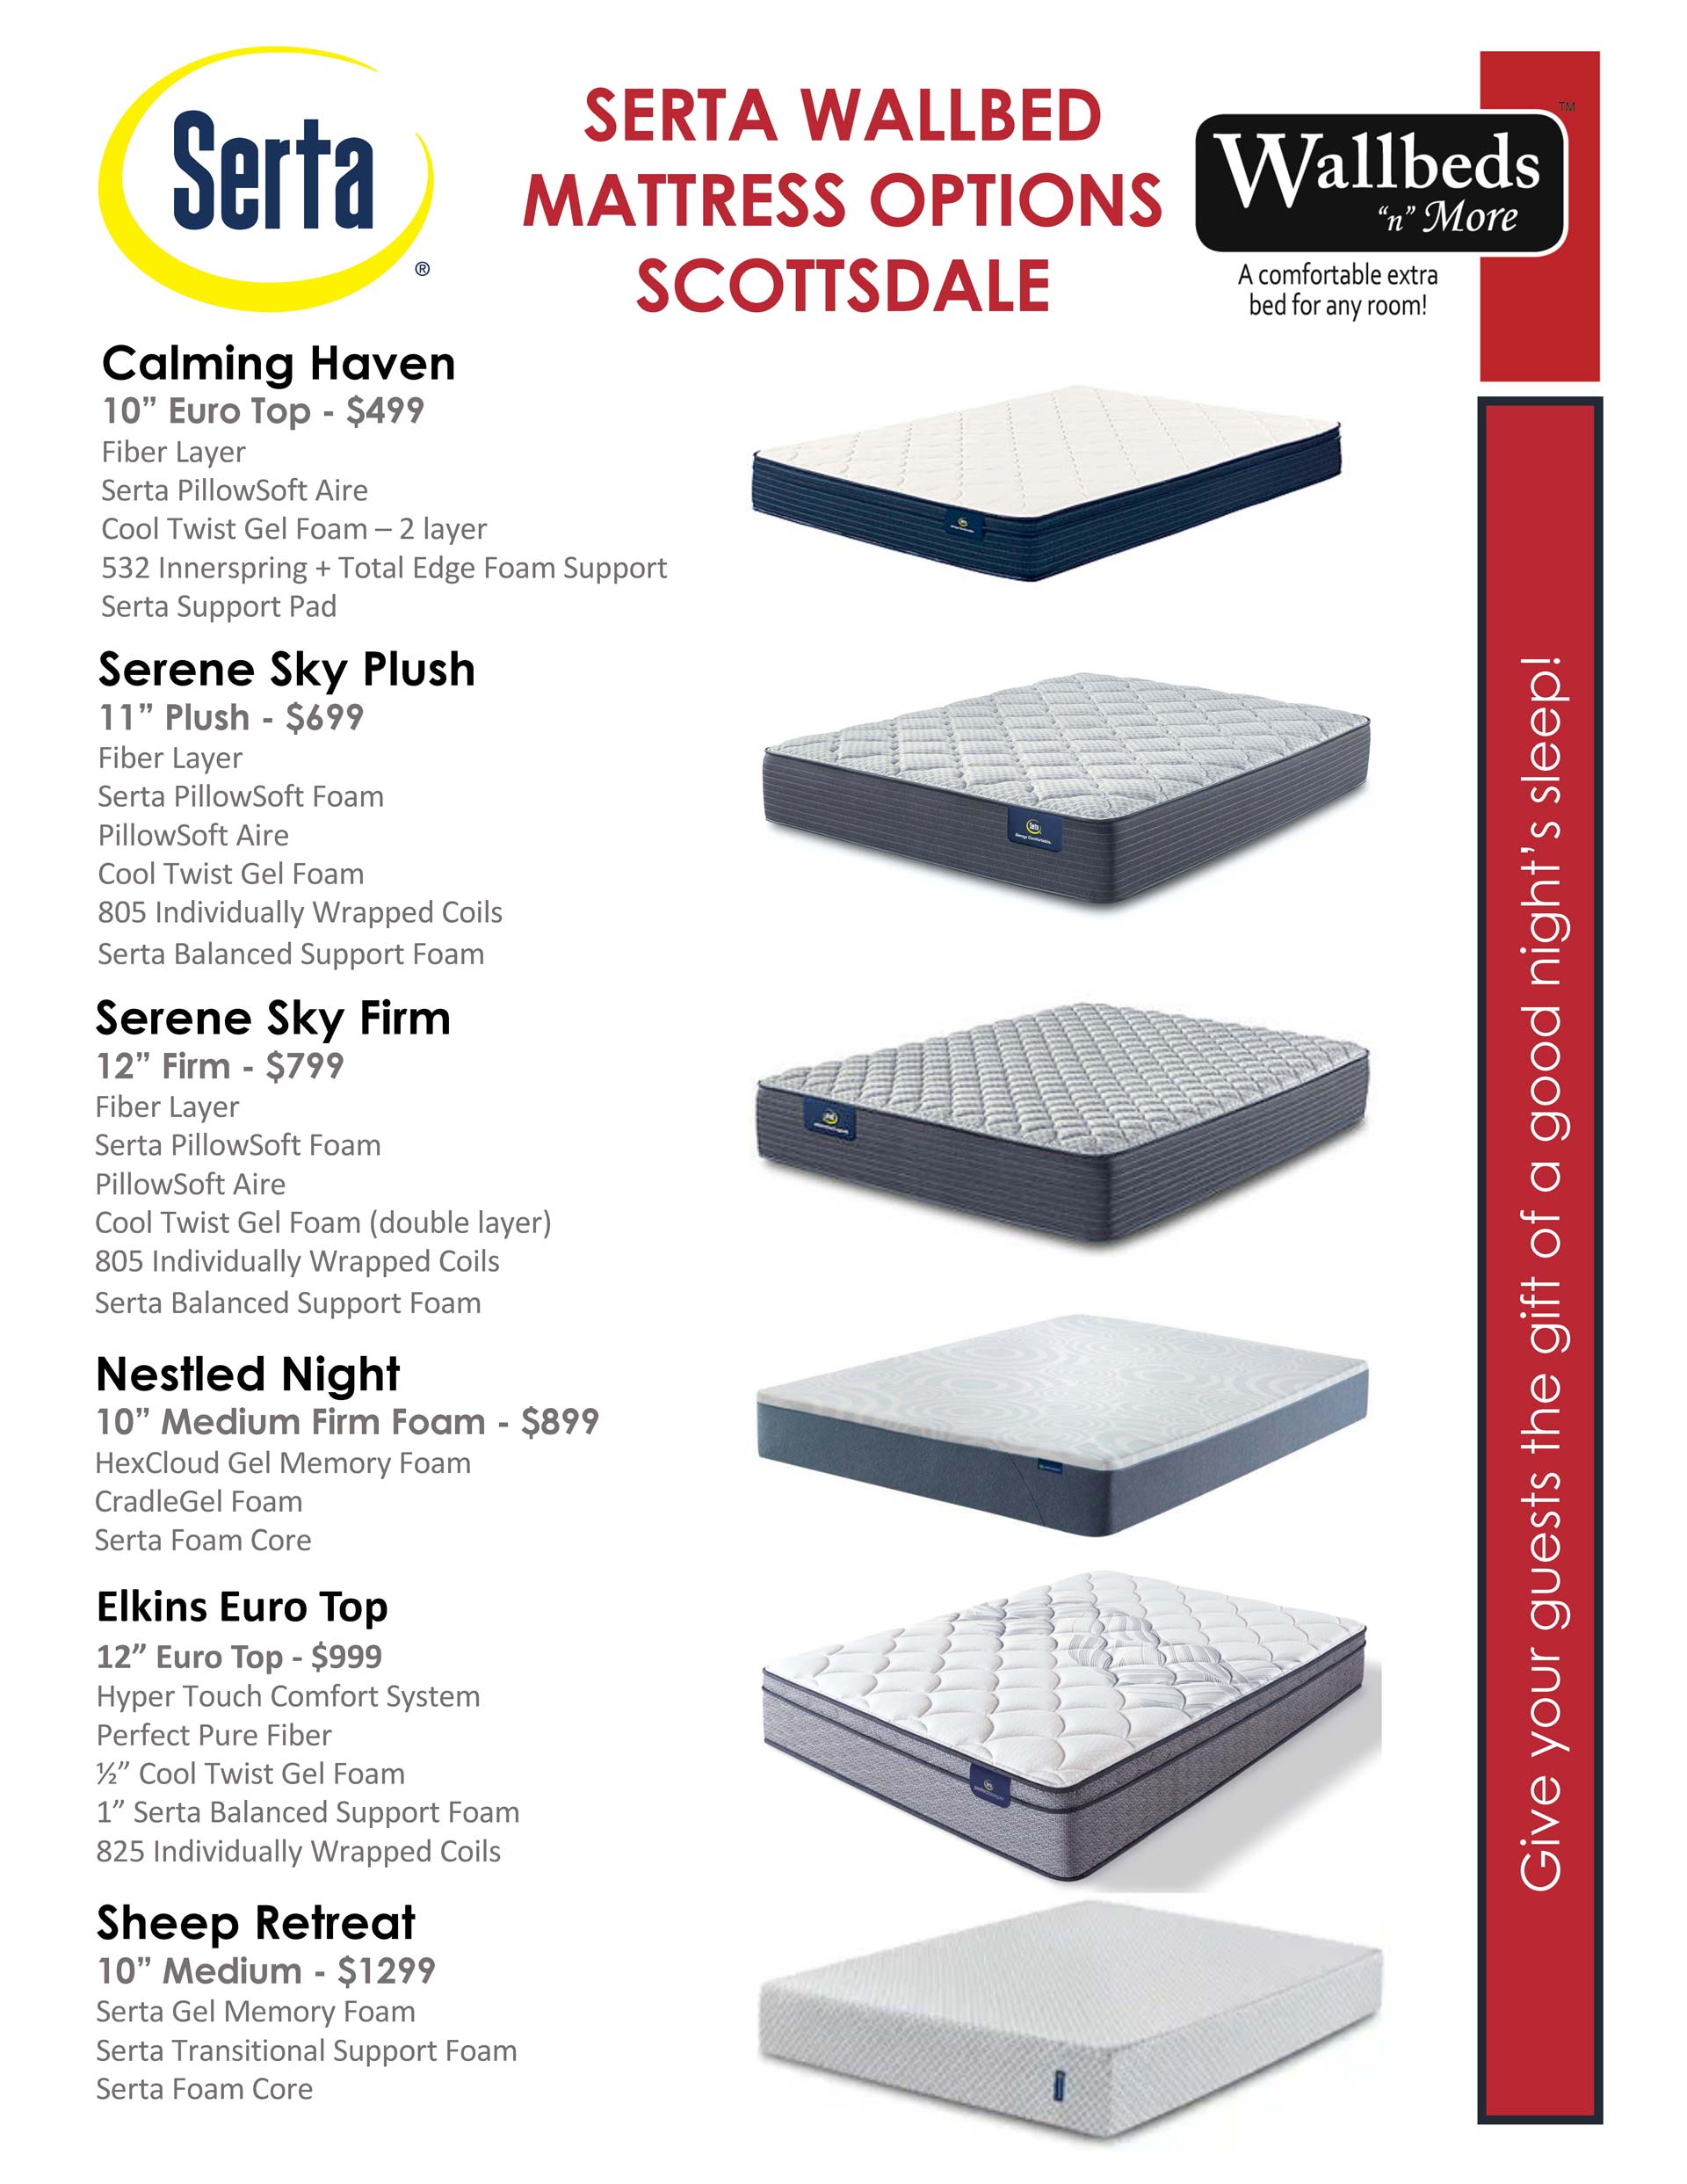 Wallbeds Scottsdale Available Mattressses